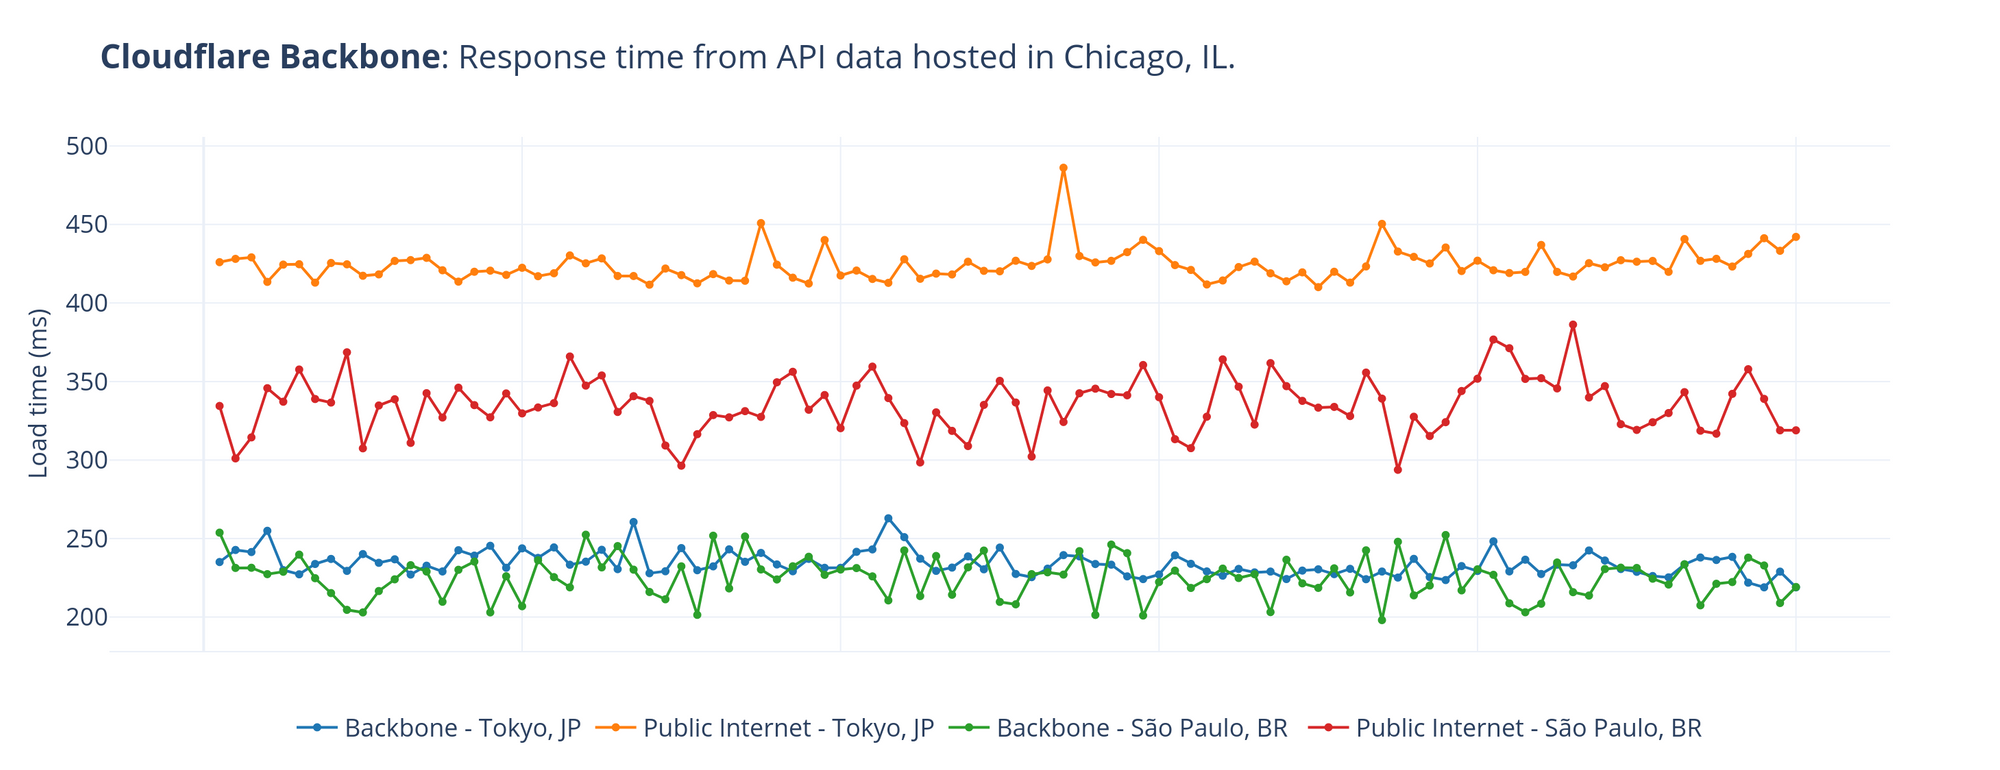 A line chart showing an overall decrease in latency and jitter when using the Cloudflare backbone, compared to the public Internet.